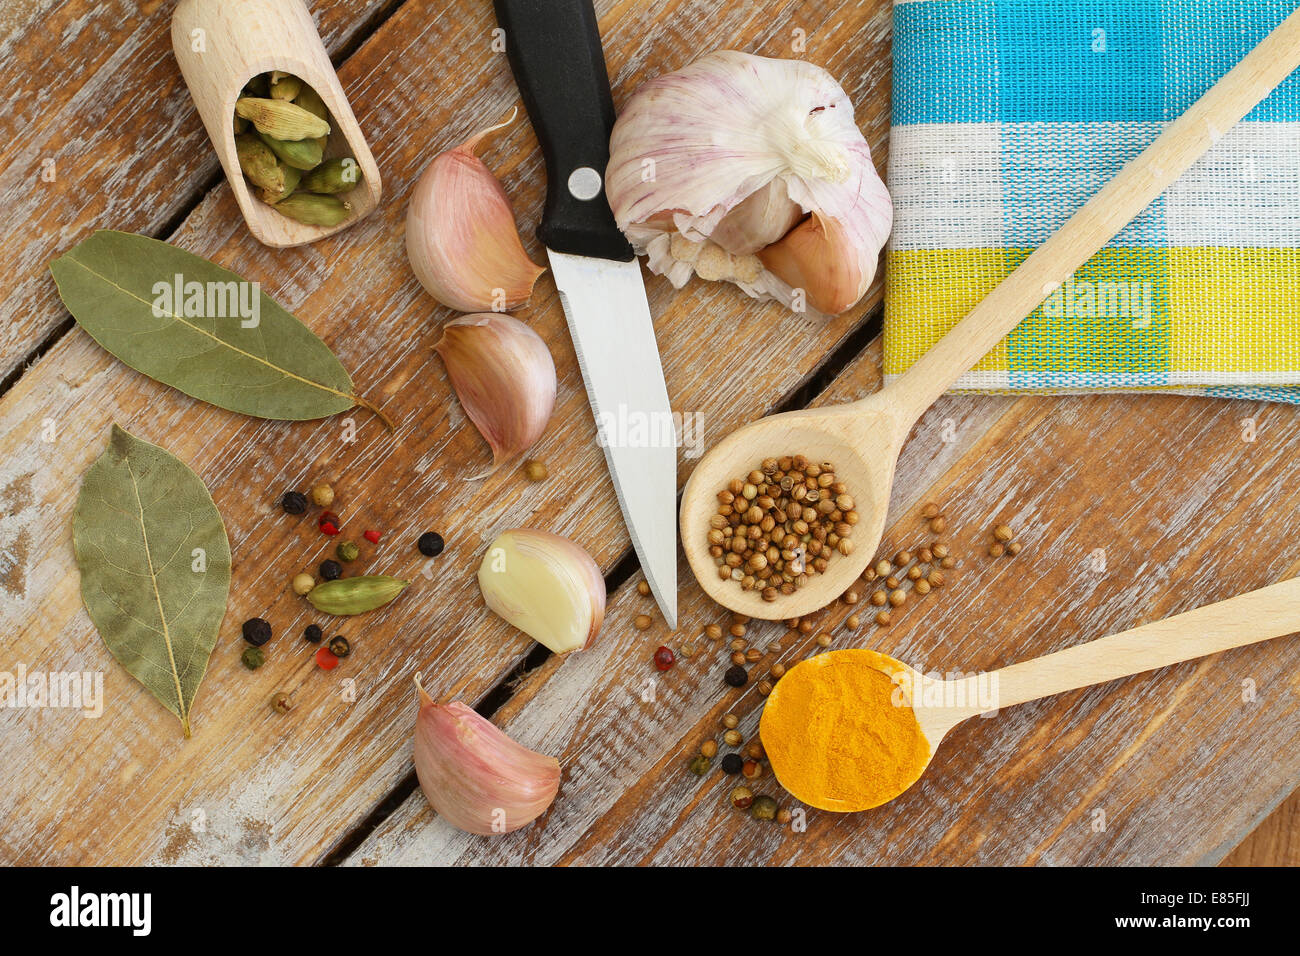 Cooking ingredients and spices on wooden surface Stock Photo